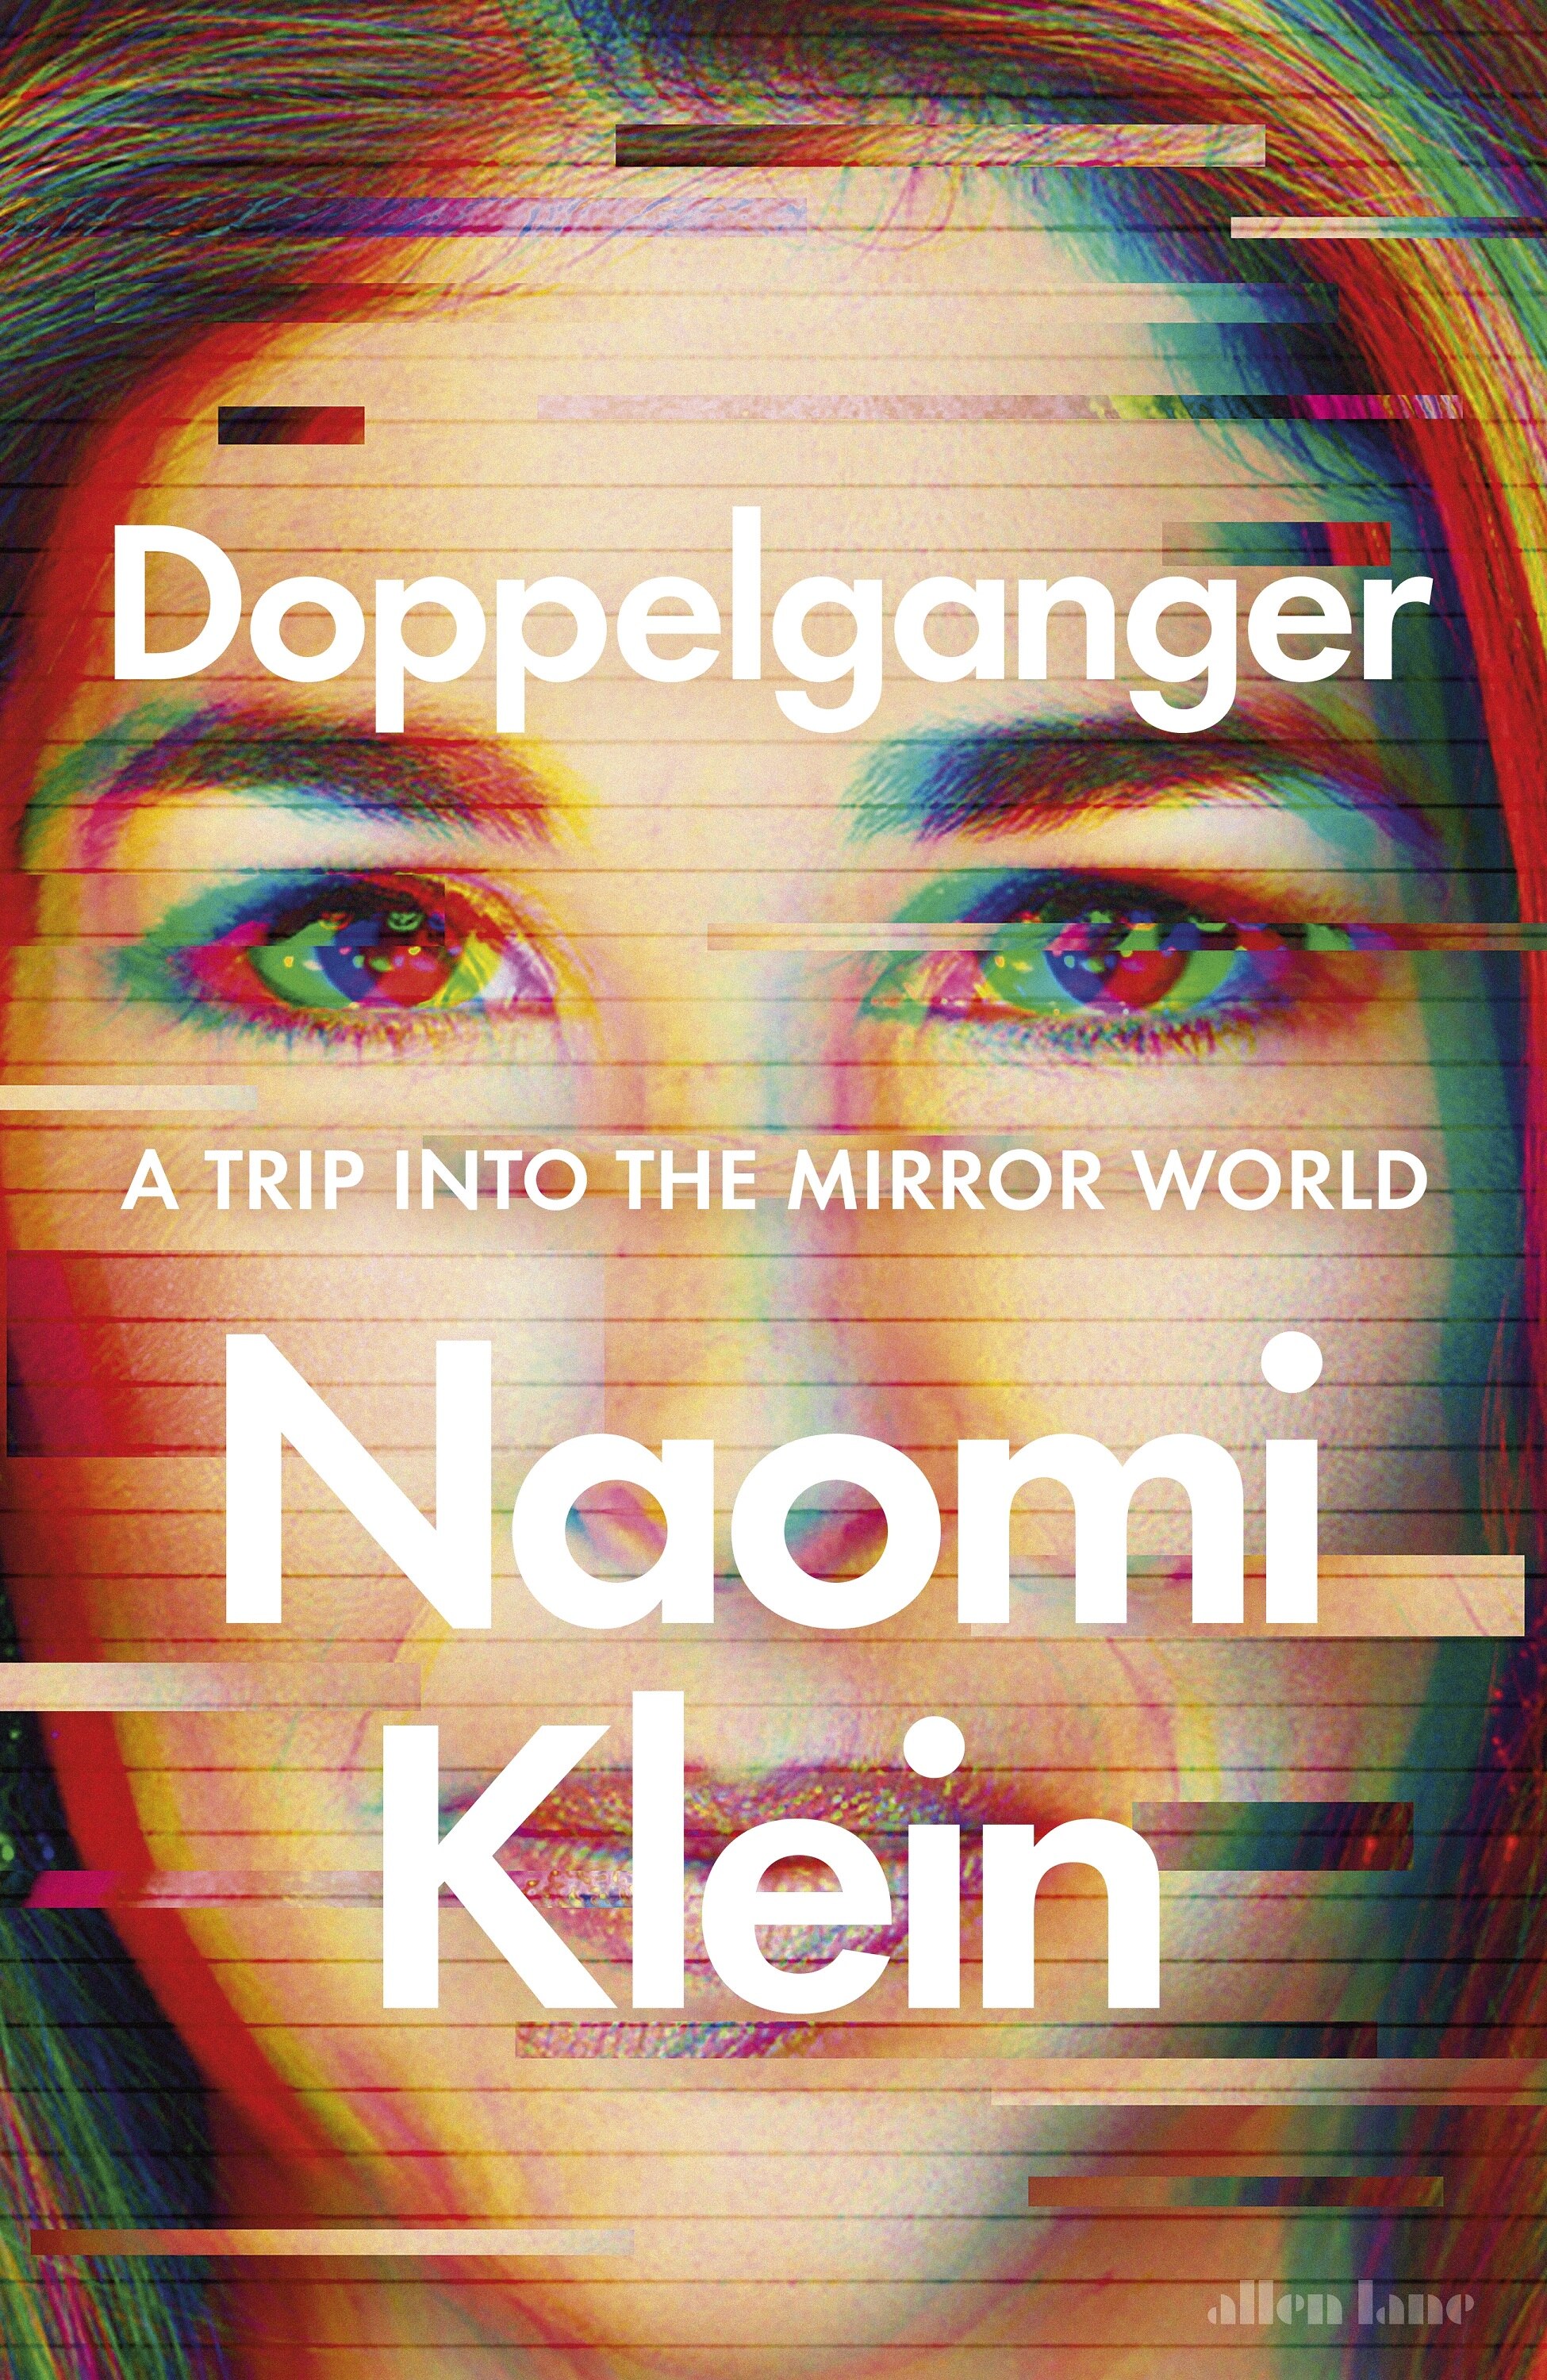 A book cover showing a glitchy digital image of a white woman's face, with text overlaid